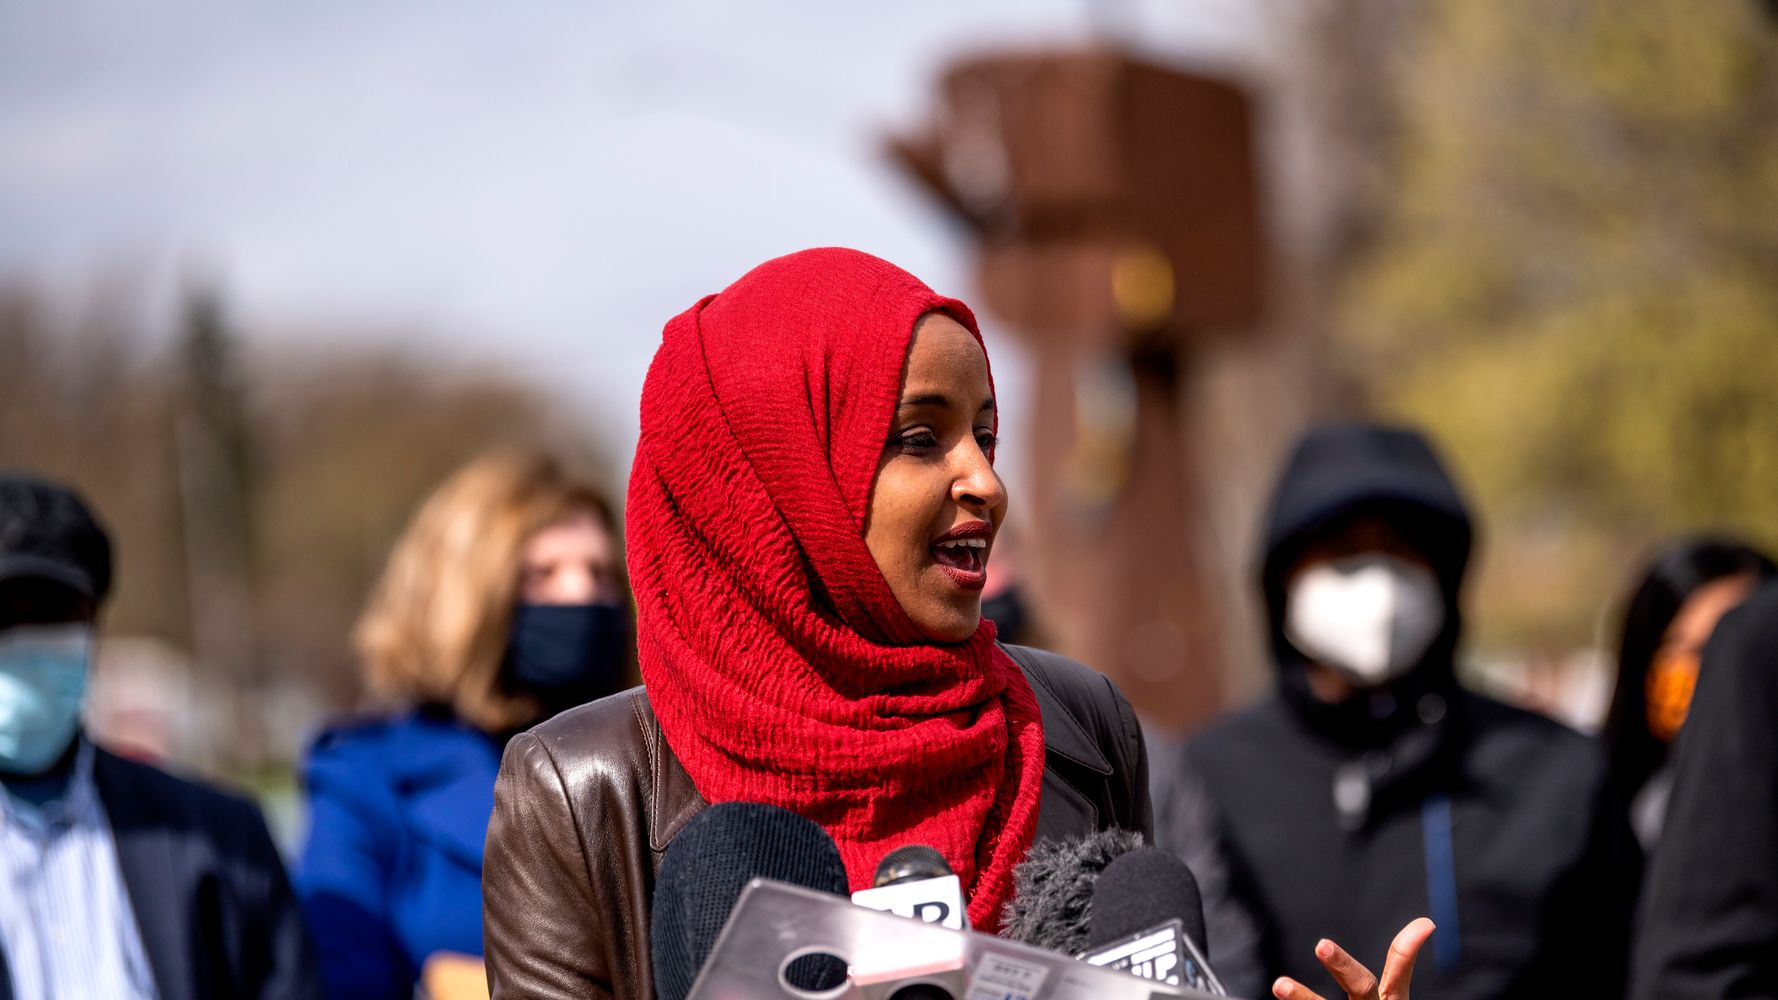 Democrats Are Again Fueling GOP Talking Points About Ilhan Omar